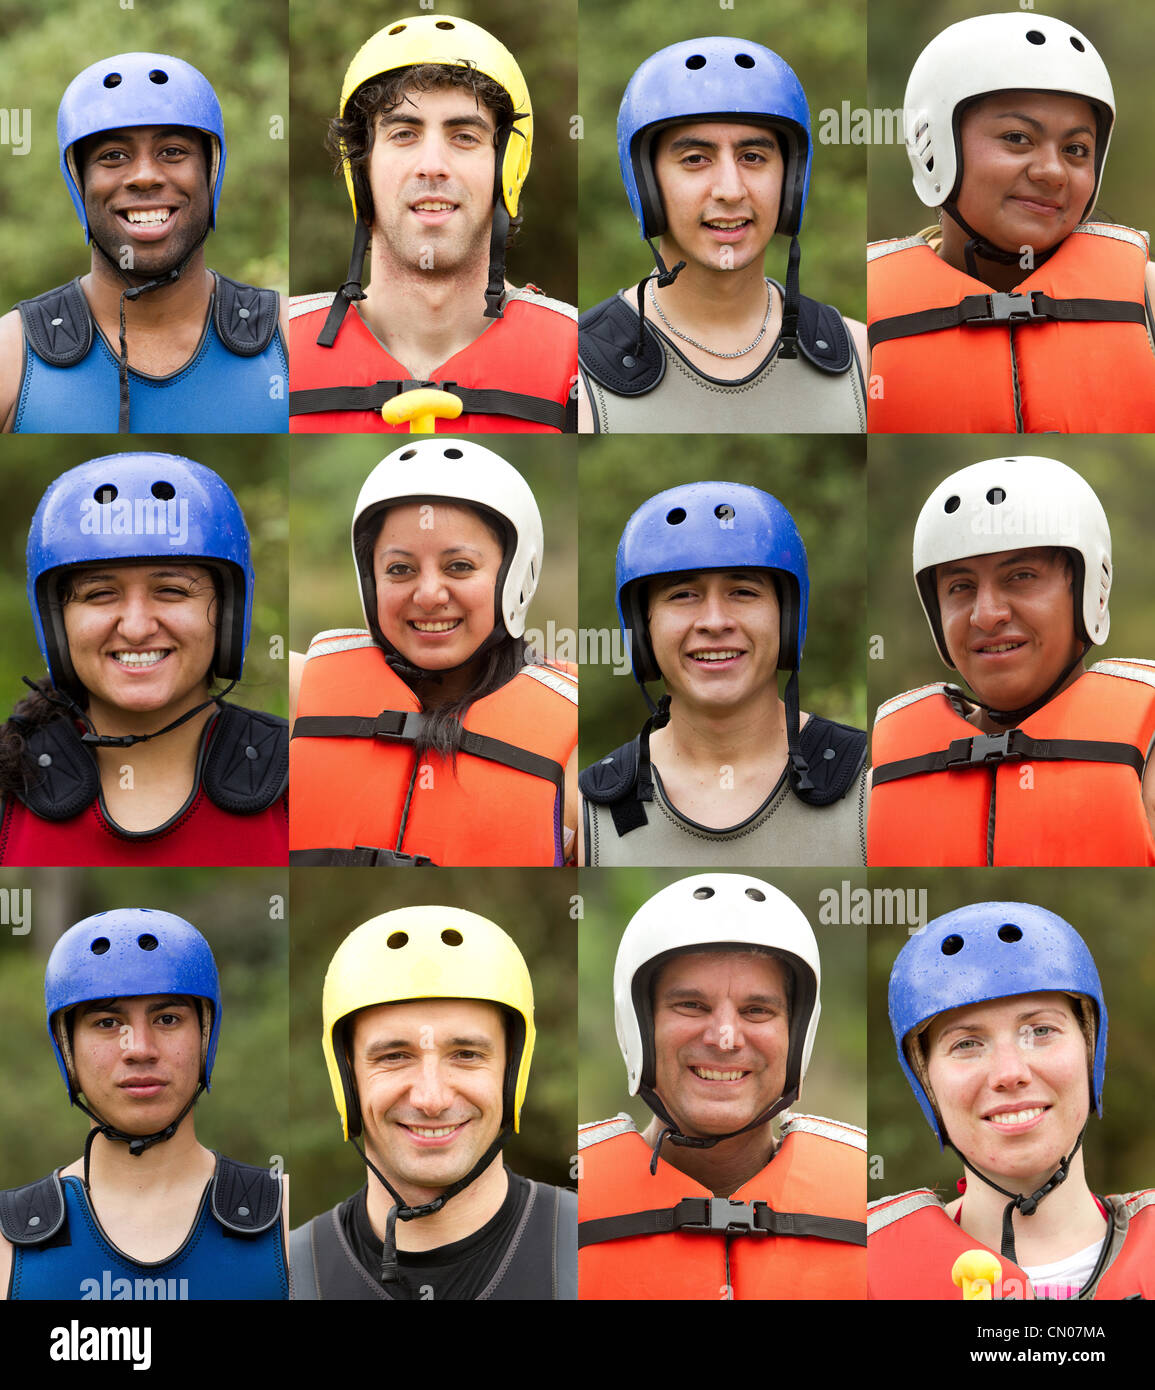 GROUP OF TWELVE YOUNG PEOPLE PRACTICING WATER SPORTS WEARING HELMETS ON GREEN NATURAL BACKGROUND Stock Photo